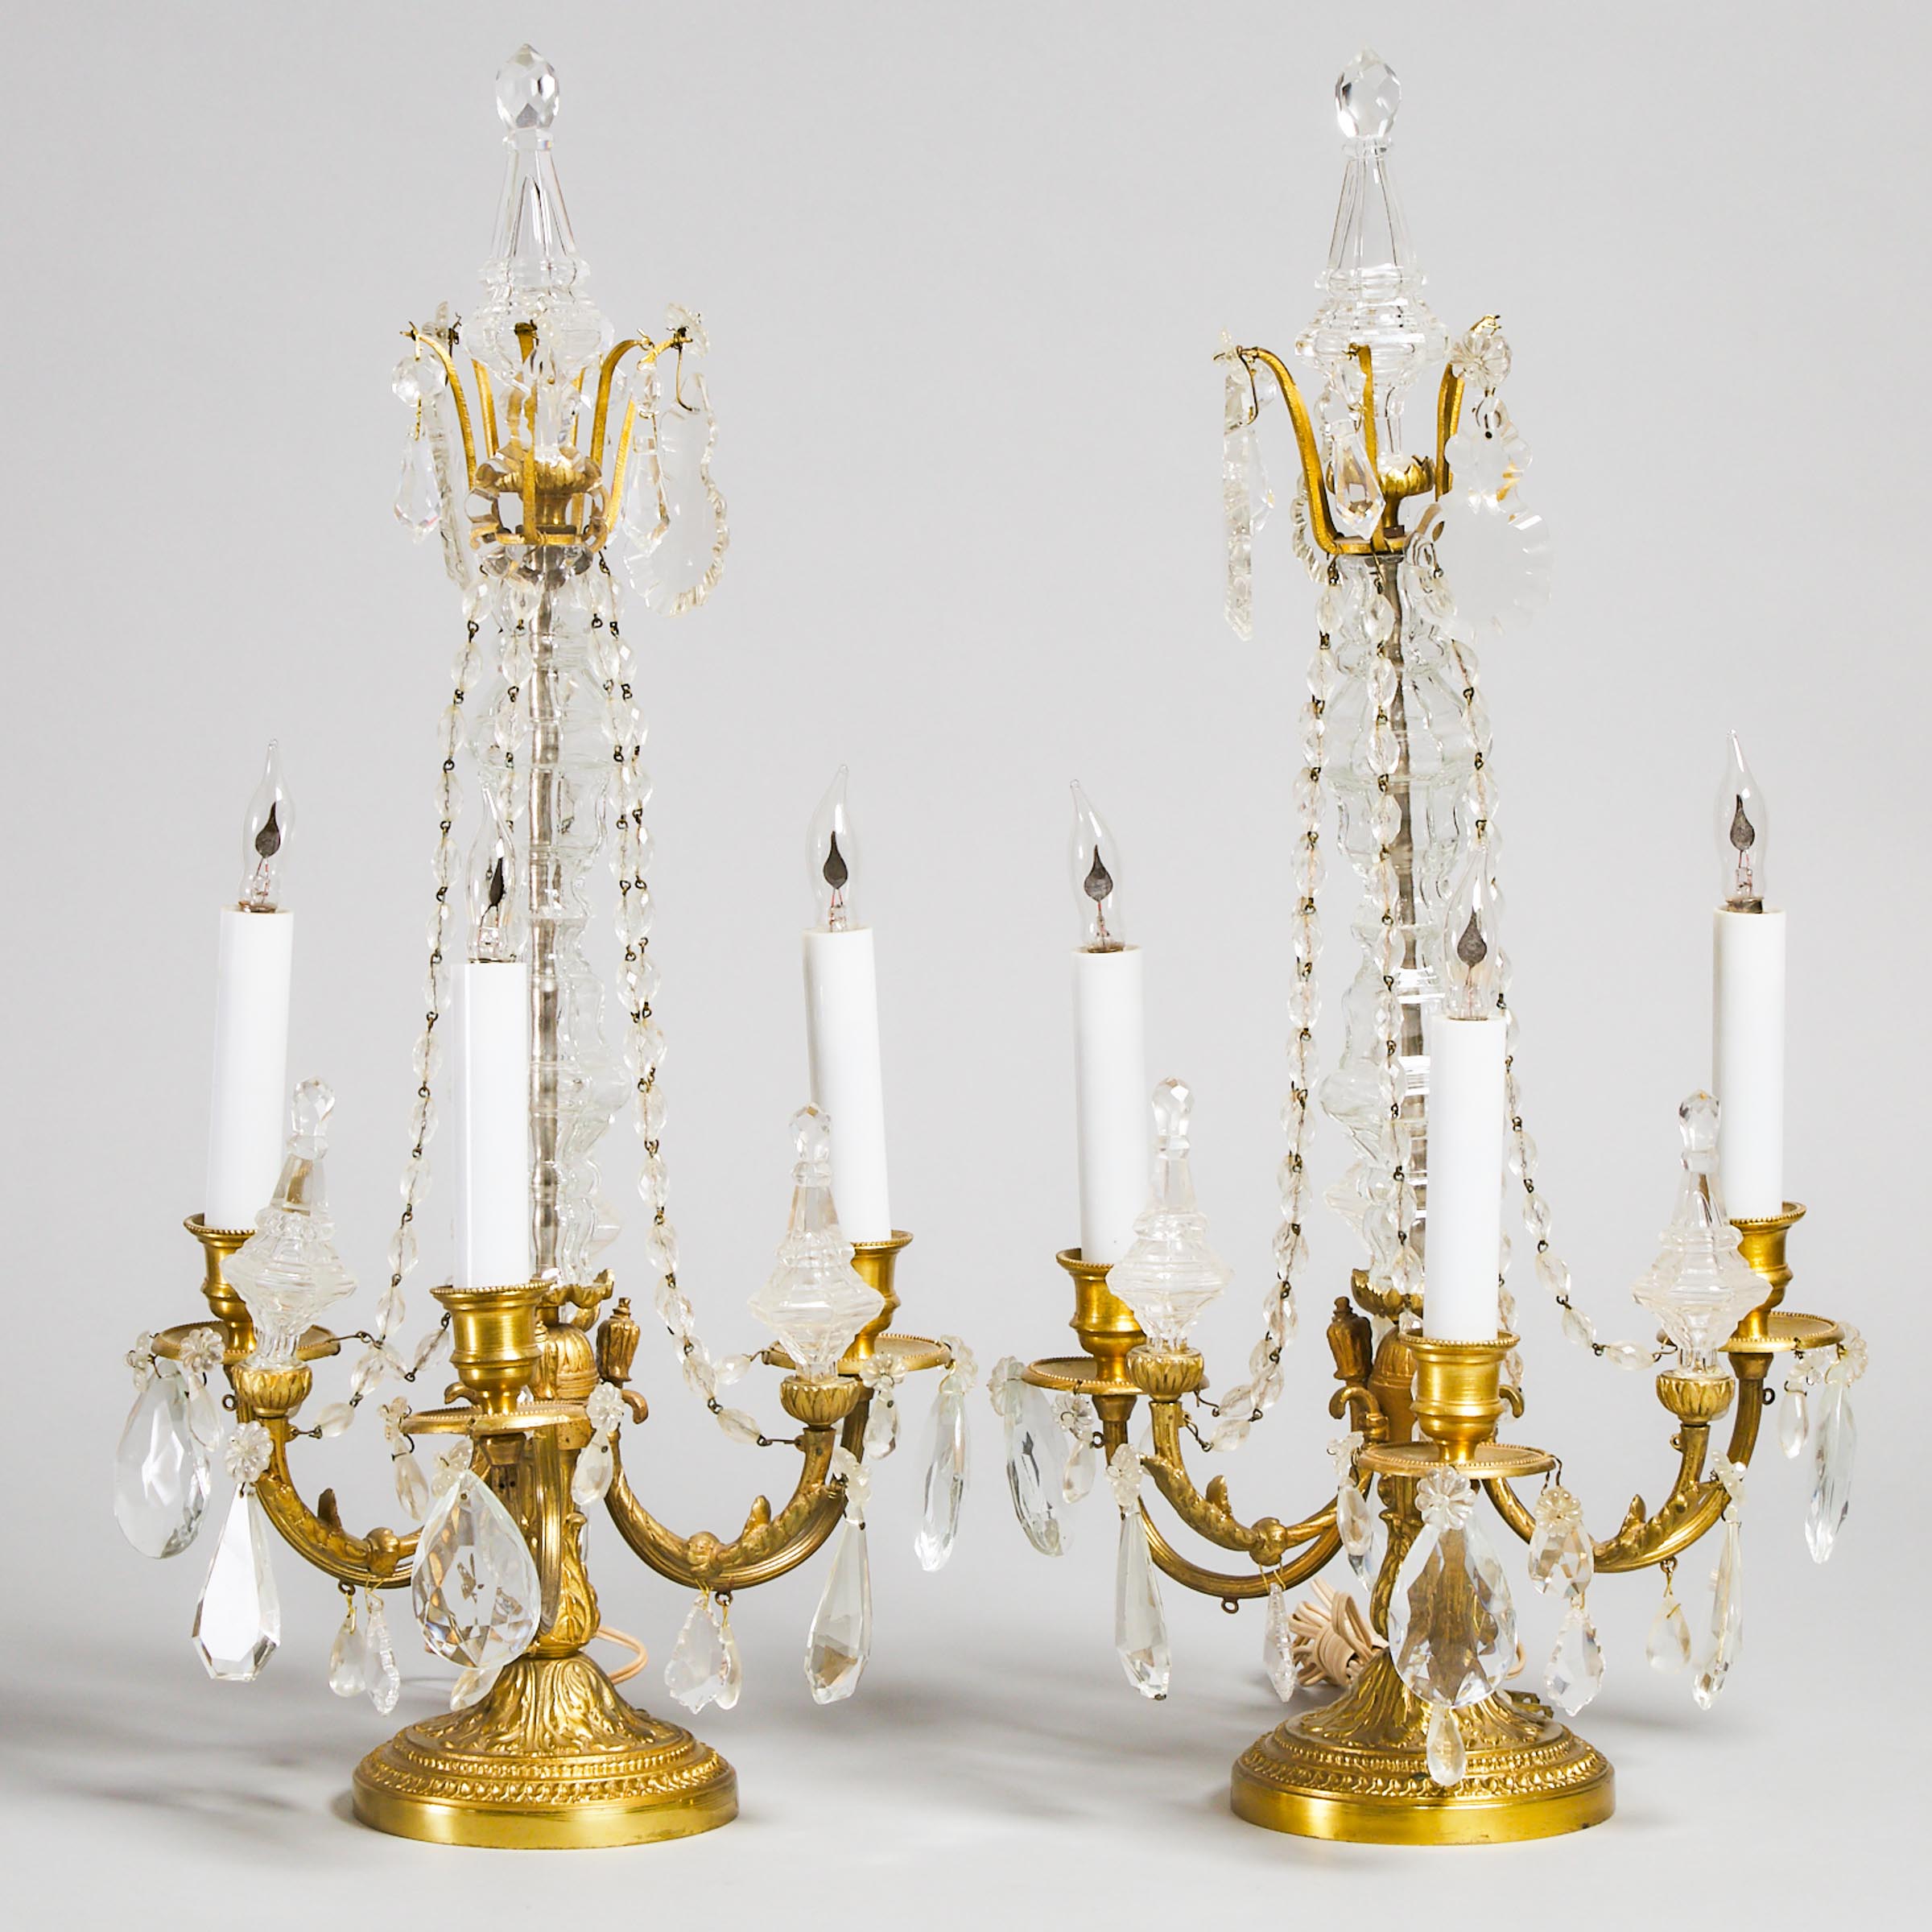 Pair of French Moulded and Cut Glass Mounted Gilt Bronze Girandoles, early-mid 20th century